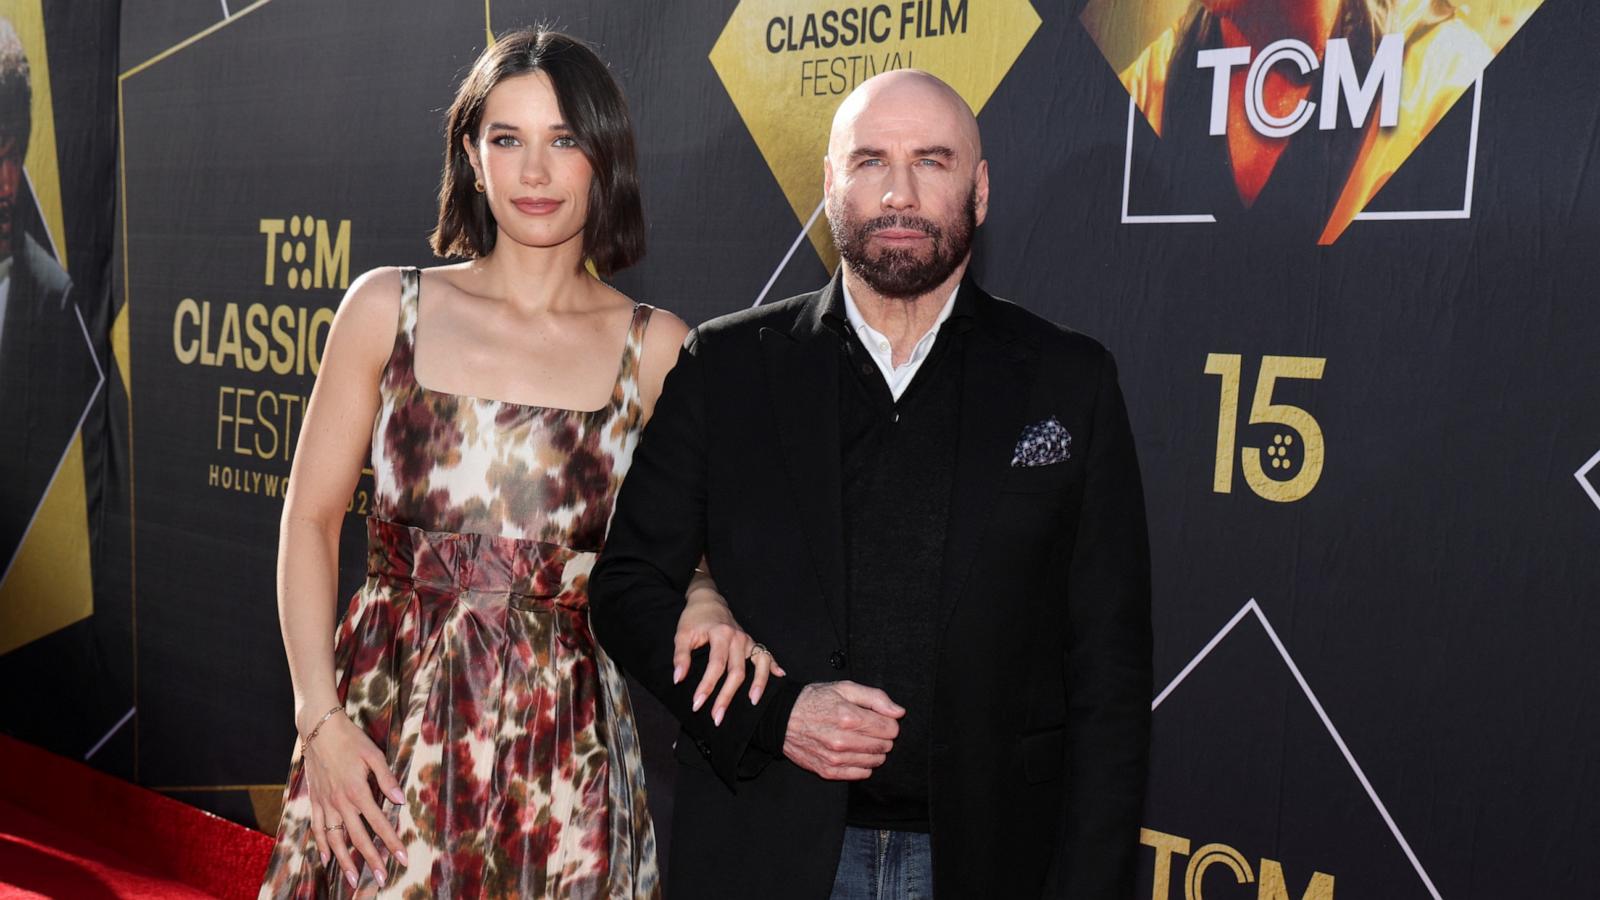 PHOTO: Cast member John Travolta and his daughter Ella Bleu Travolta attend a screening for the 30th anniversary of the movie "Pulp Fiction" in Los Angeles, Apr. 18, 2024.